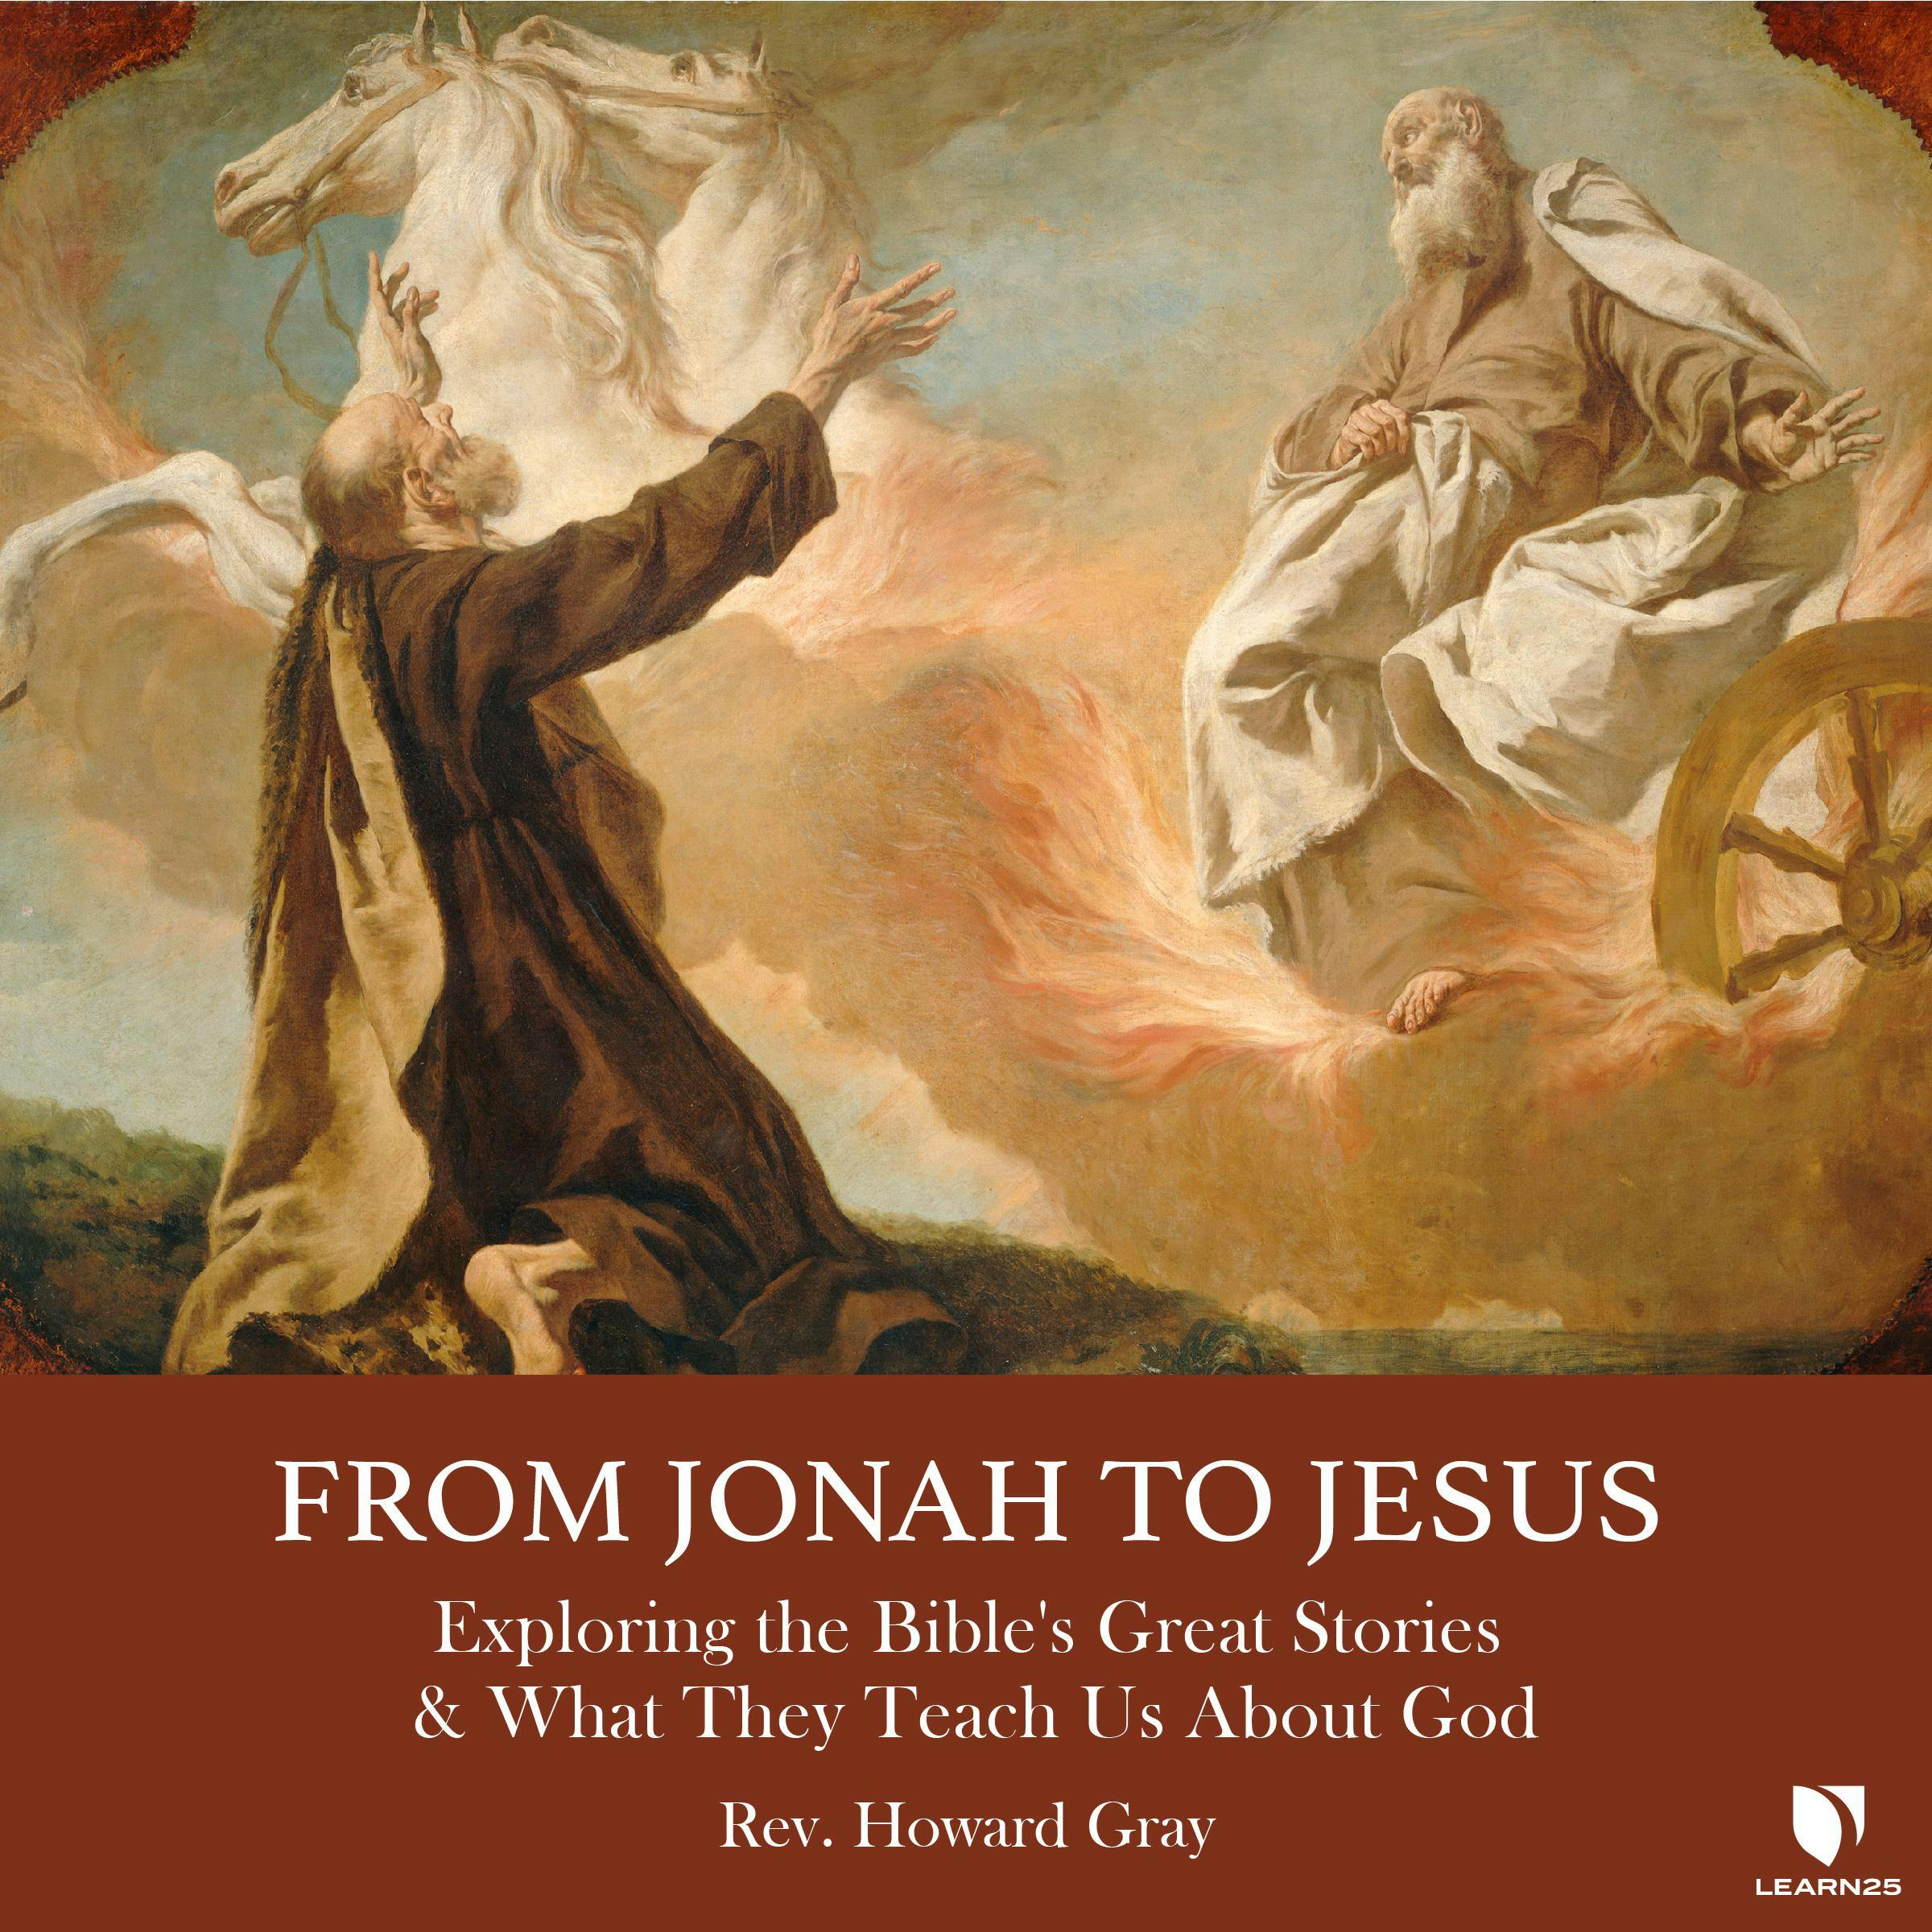 From Jonah to Jesus: Exploring the Bible's Great Stories & What They Teach Us About God - Howard Gray